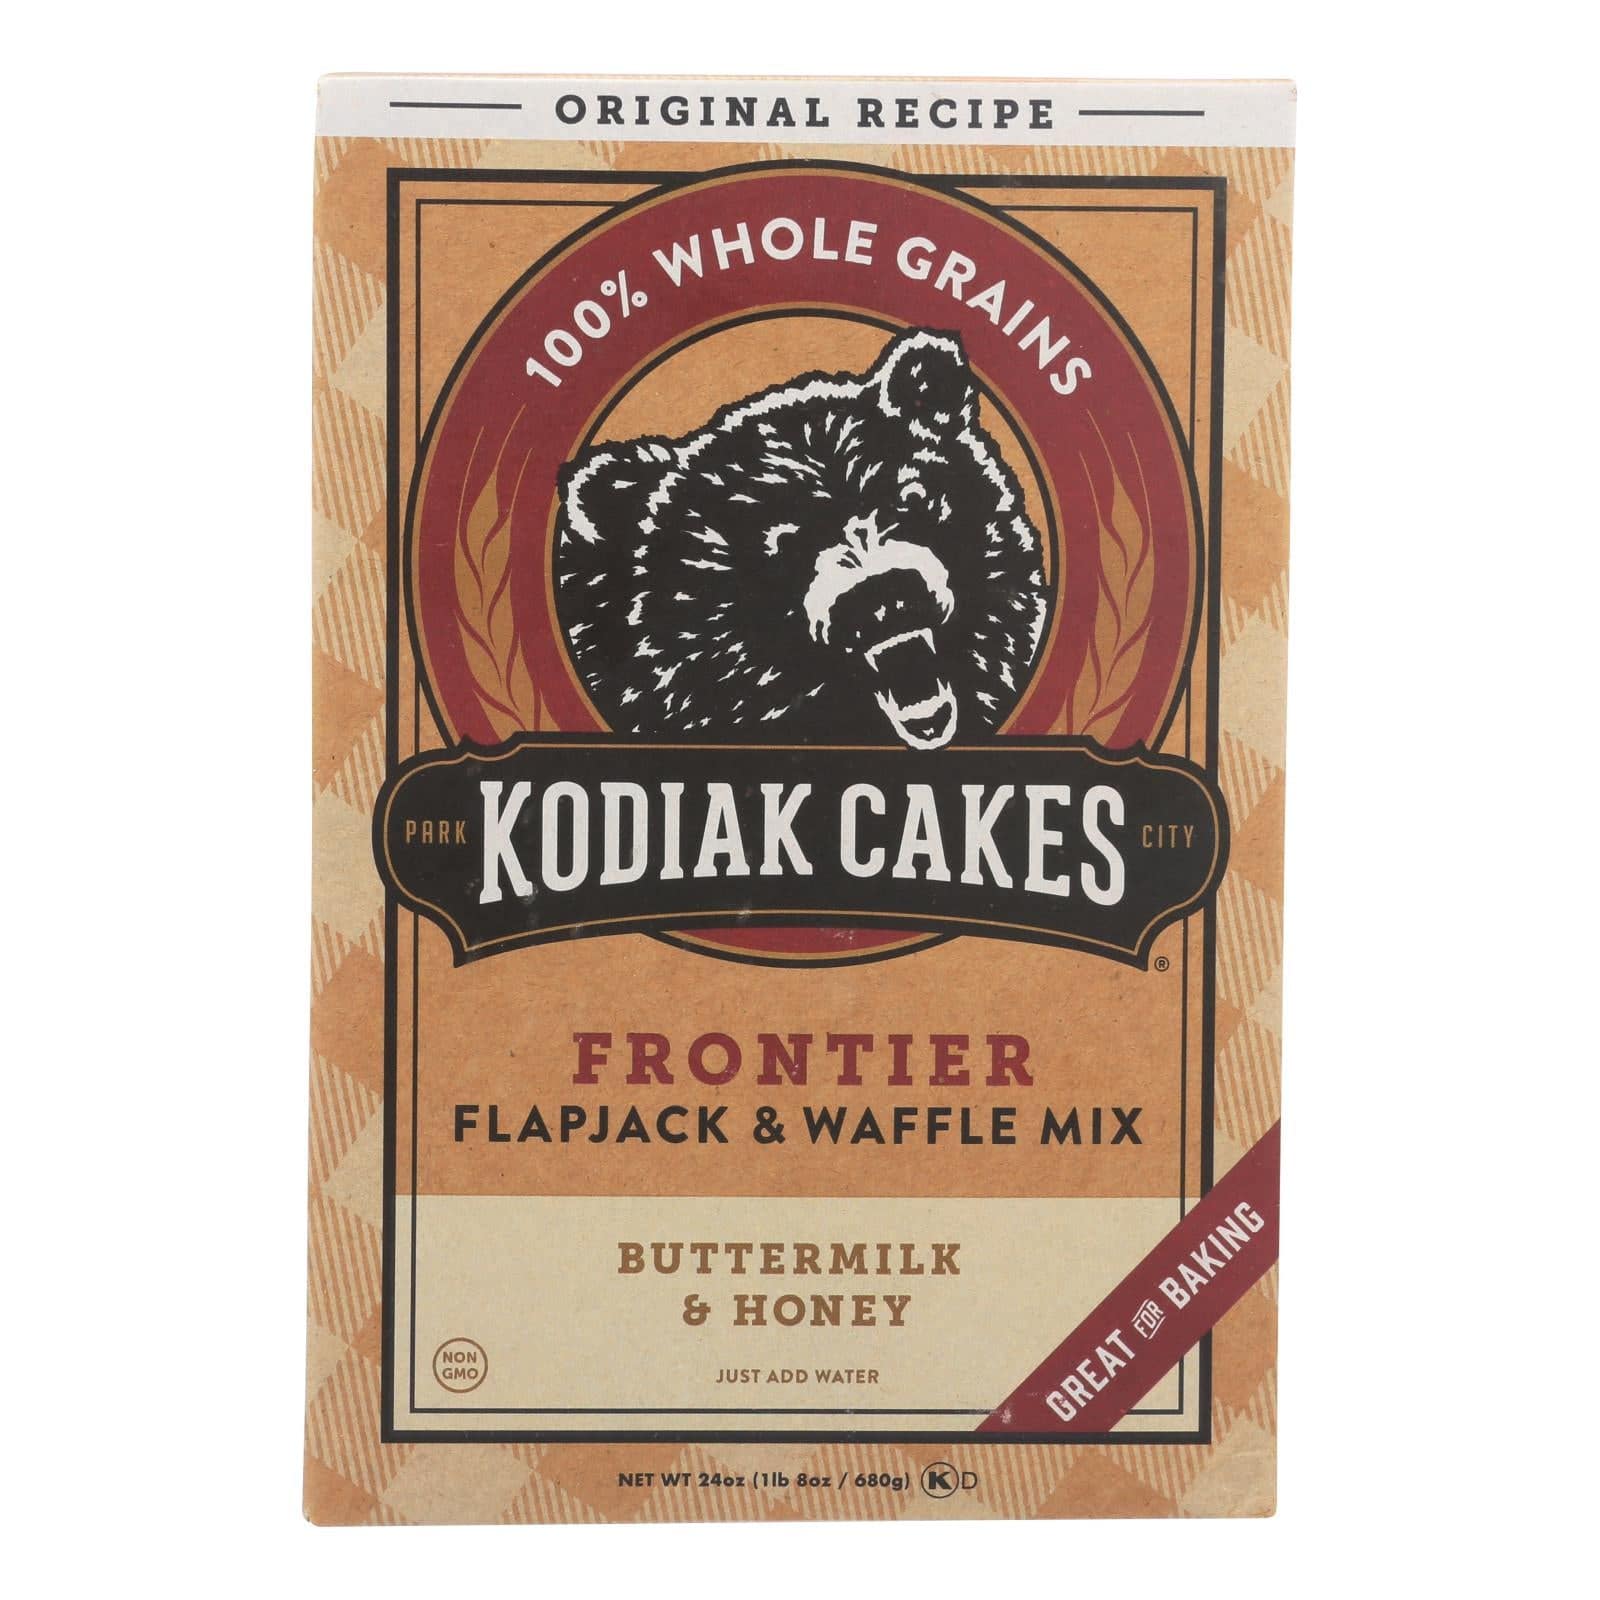 Buy Kodiak Cakes Flapjack And Waffle Mix - Buttermilk And Honey - Case Of 6 - 24 Oz.  at OnlyNaturals.us